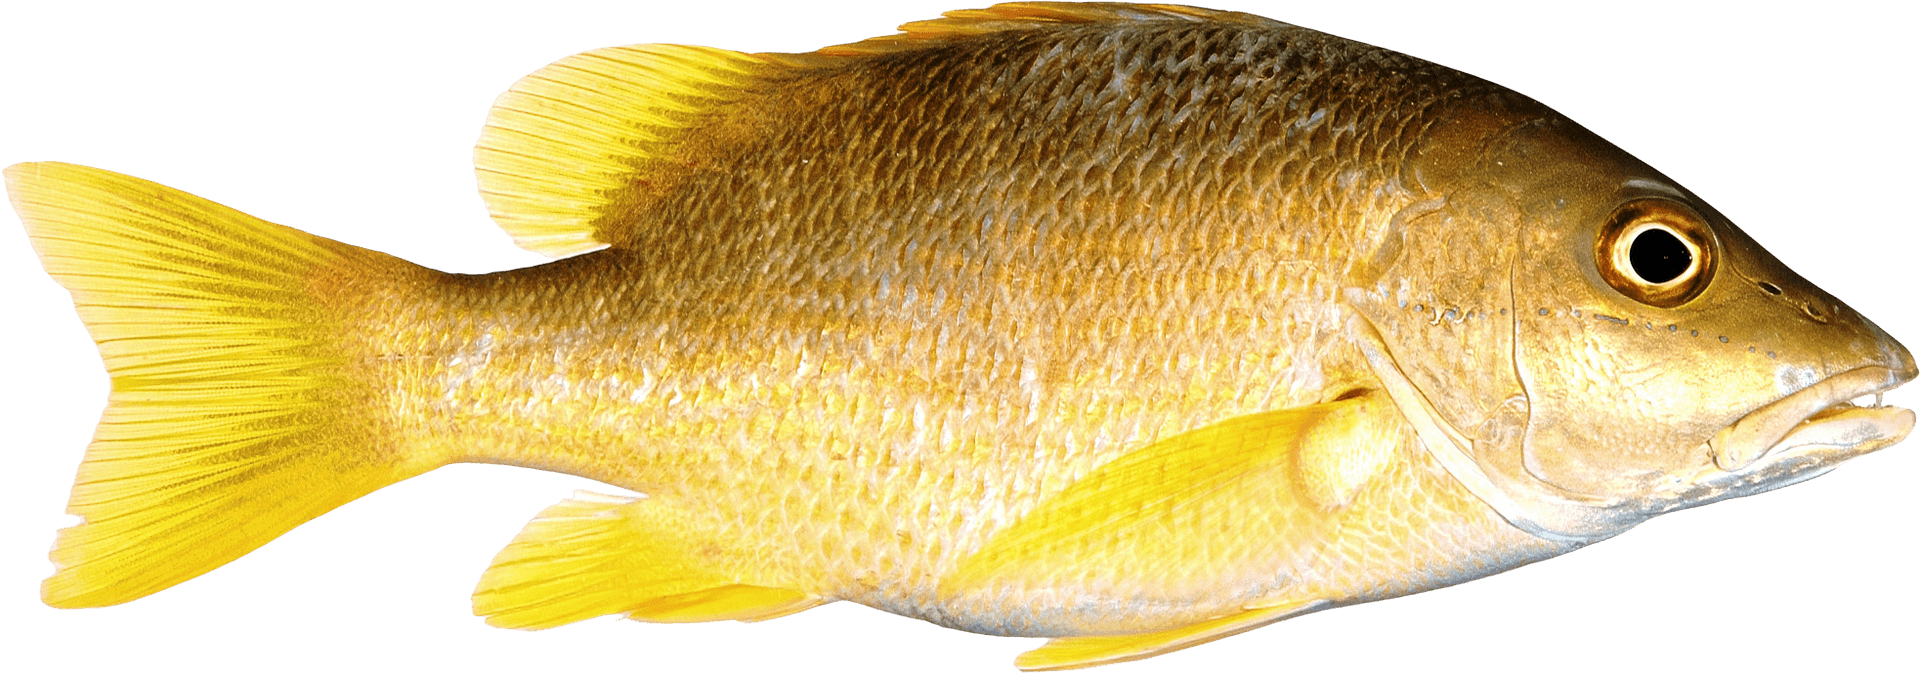 Yellow Fish Isolatedon Transparent Background.png PNG